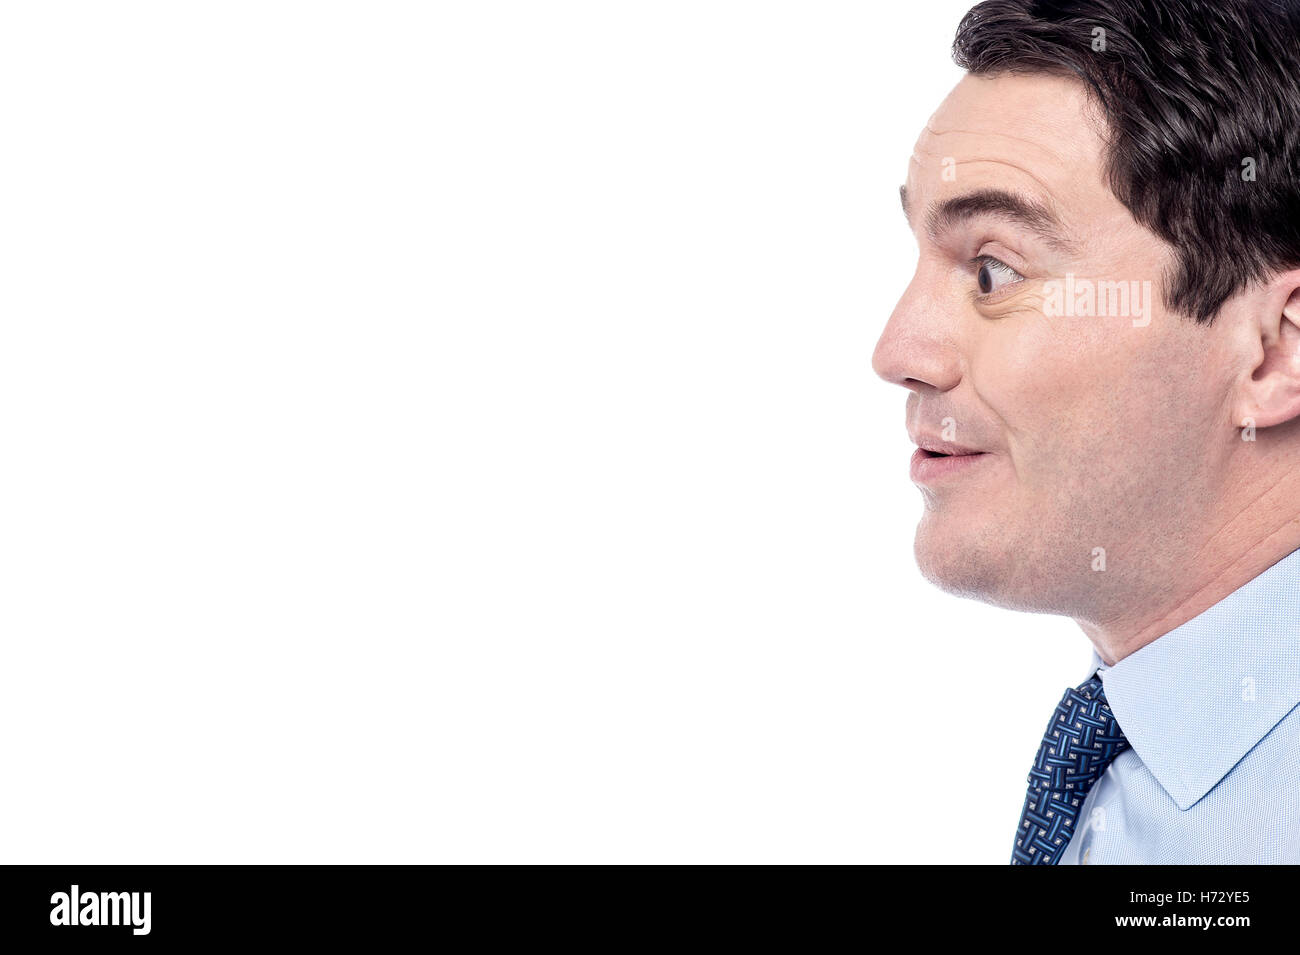 laugh laughs laughing twit giggle smile smiling laughter laughingly smilingly smiles isolated male masculine european caucasian Stock Photo